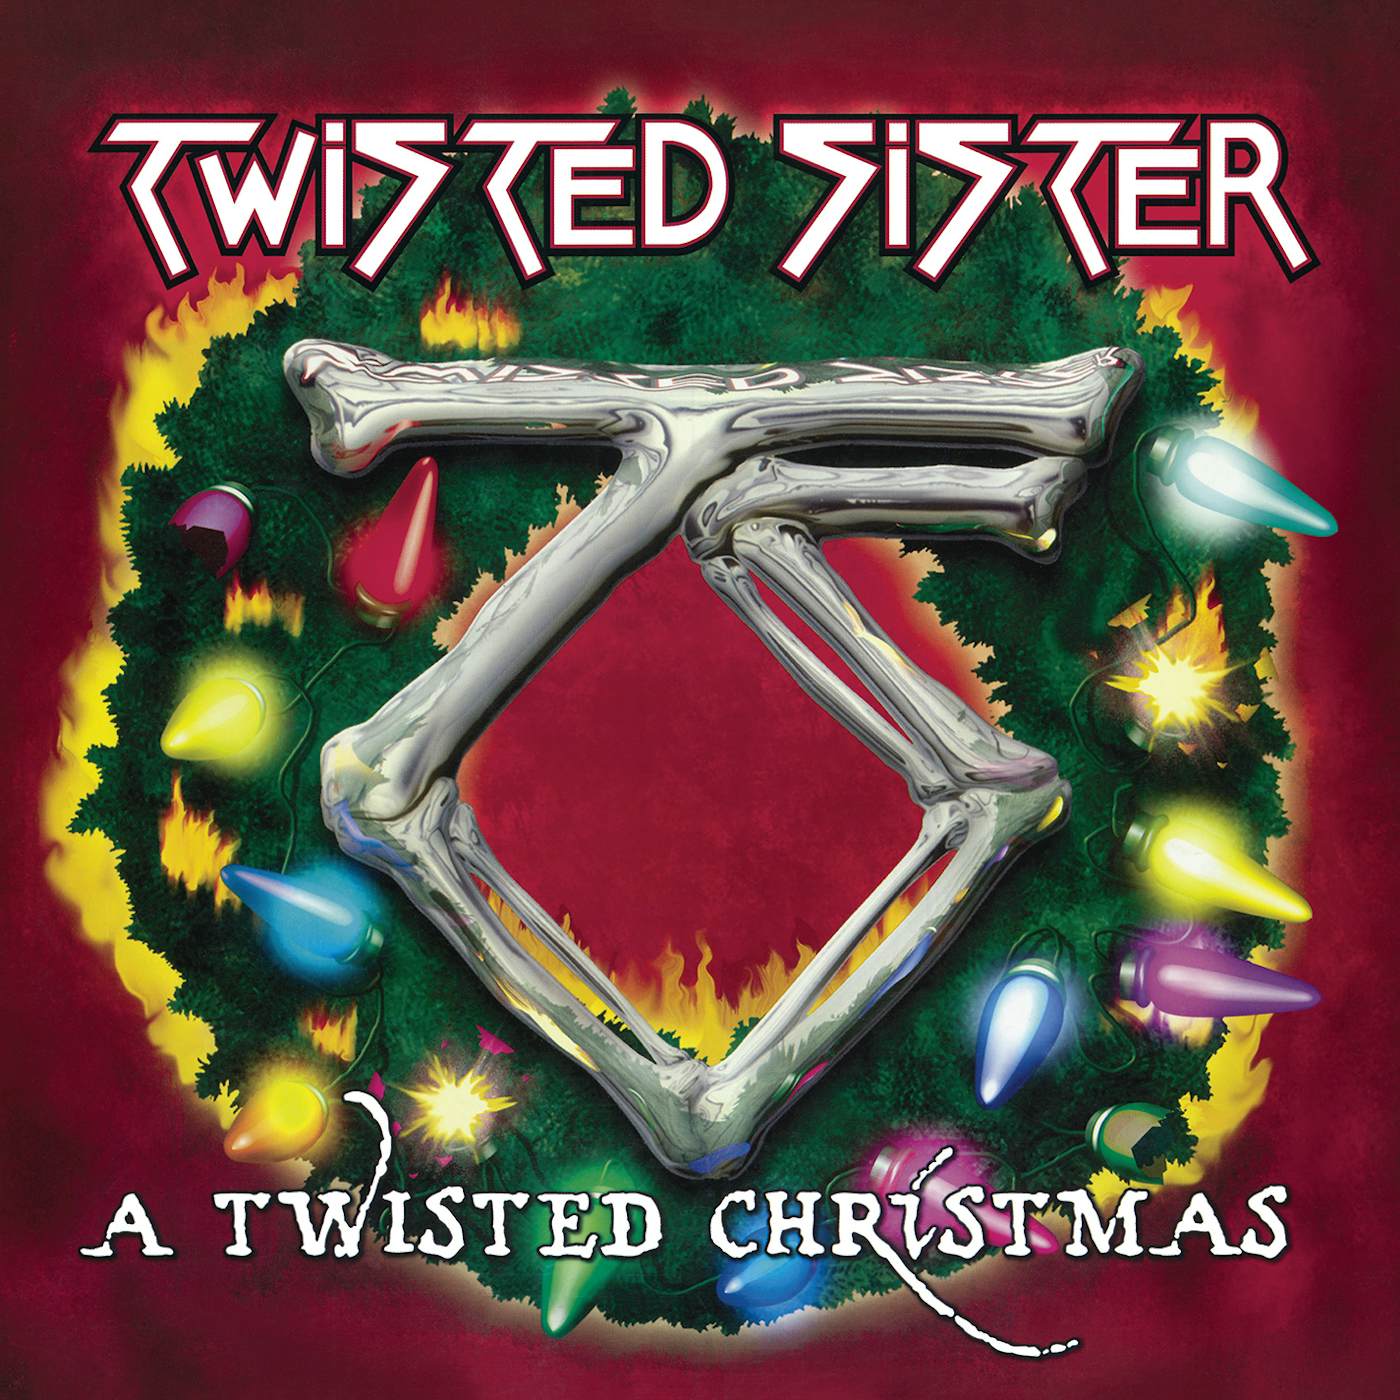 Twisted Sister TWISTED CHRISTMAS Vinyl Record